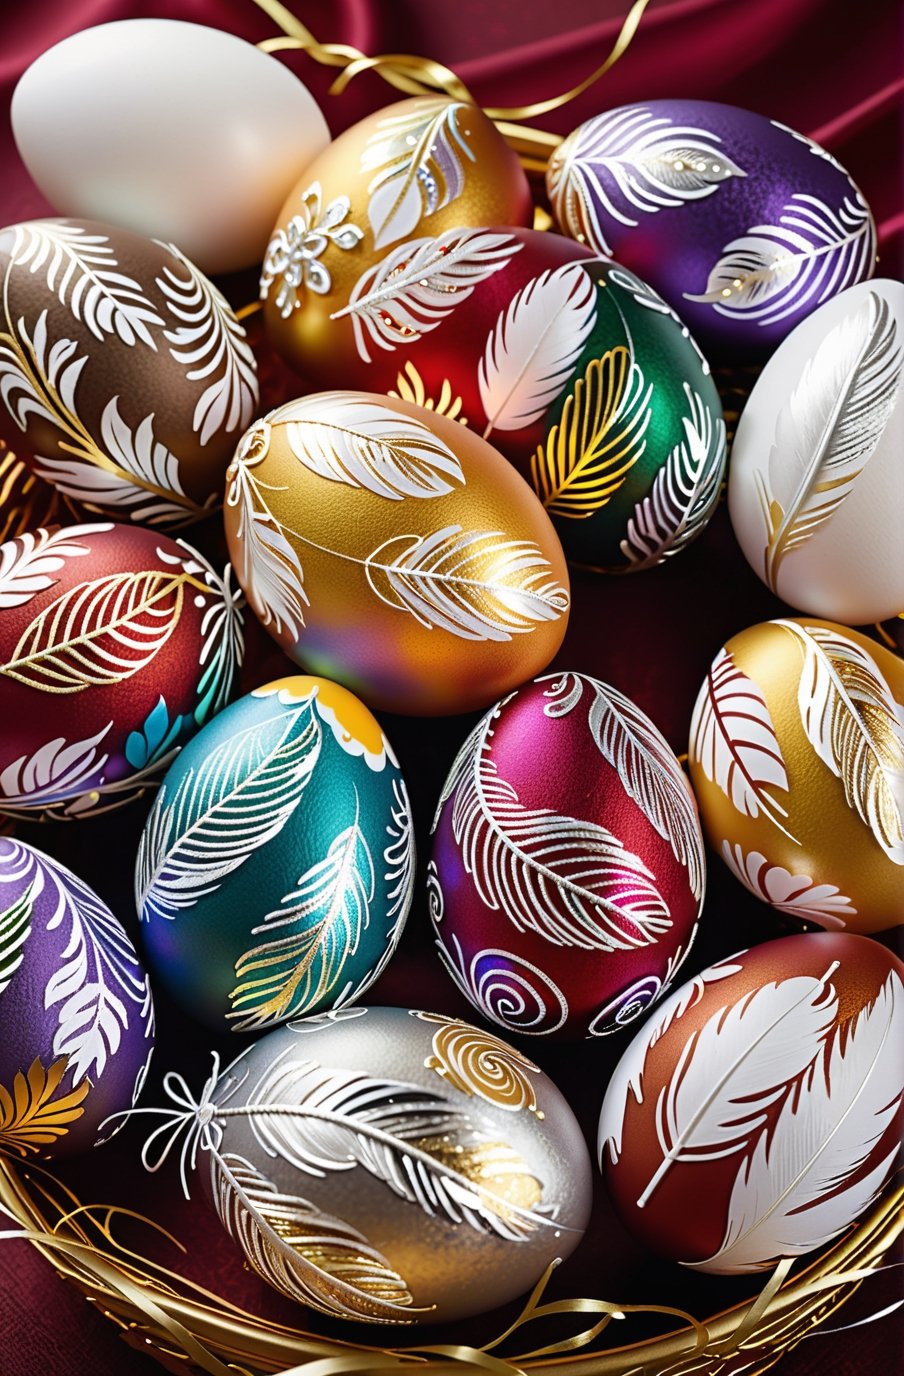 Easter eggs designed with honeysuckle and swirl patterns in a harmonious mix of rainbow colors,
Gold and silver threads are bundled together and wrapped from the bottom of the egg, as if protecting it, along with many white feathers.
The egg shines even brighter due to the intense lighting that illuminates the egg on a dark red and golden background.

Ultra-clear, Ultra-detailed, ultra-realistic, ultra-close up